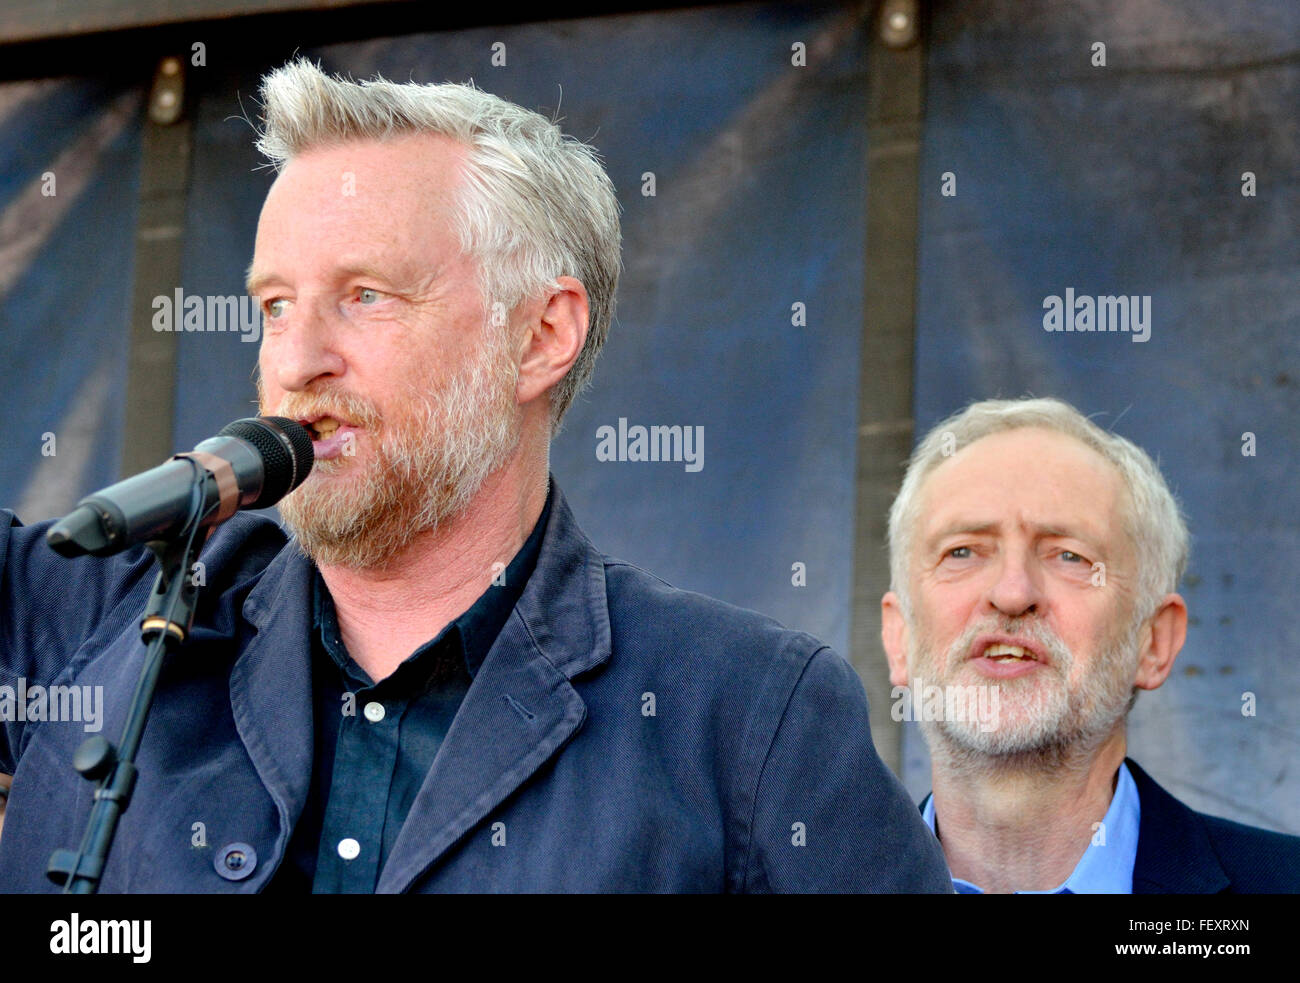 Billy Bragg and Jeremy Corbyn singing The Red Flag - 'Refugees Welcome Here' rally, Parliament Square, London 12th Sept 2015... Stock Photo